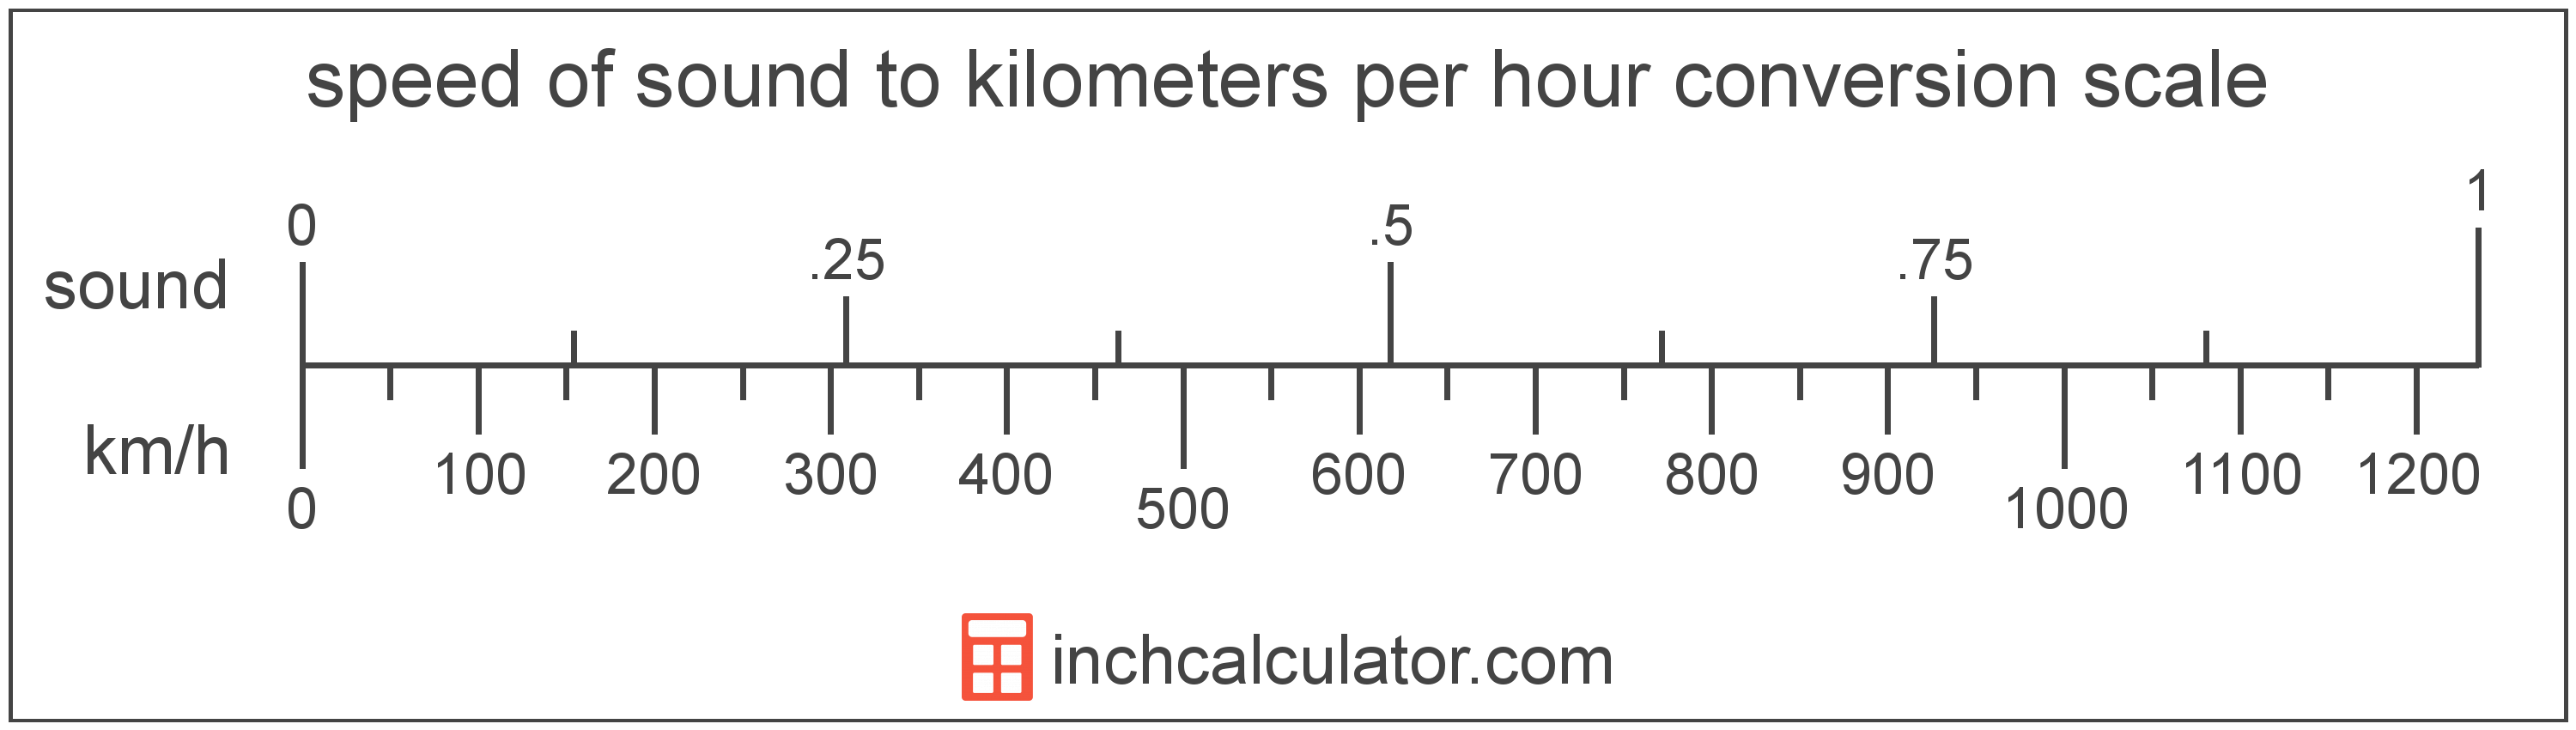 conversion scale showing kilometers per hour and equivalent speed of sound speed values